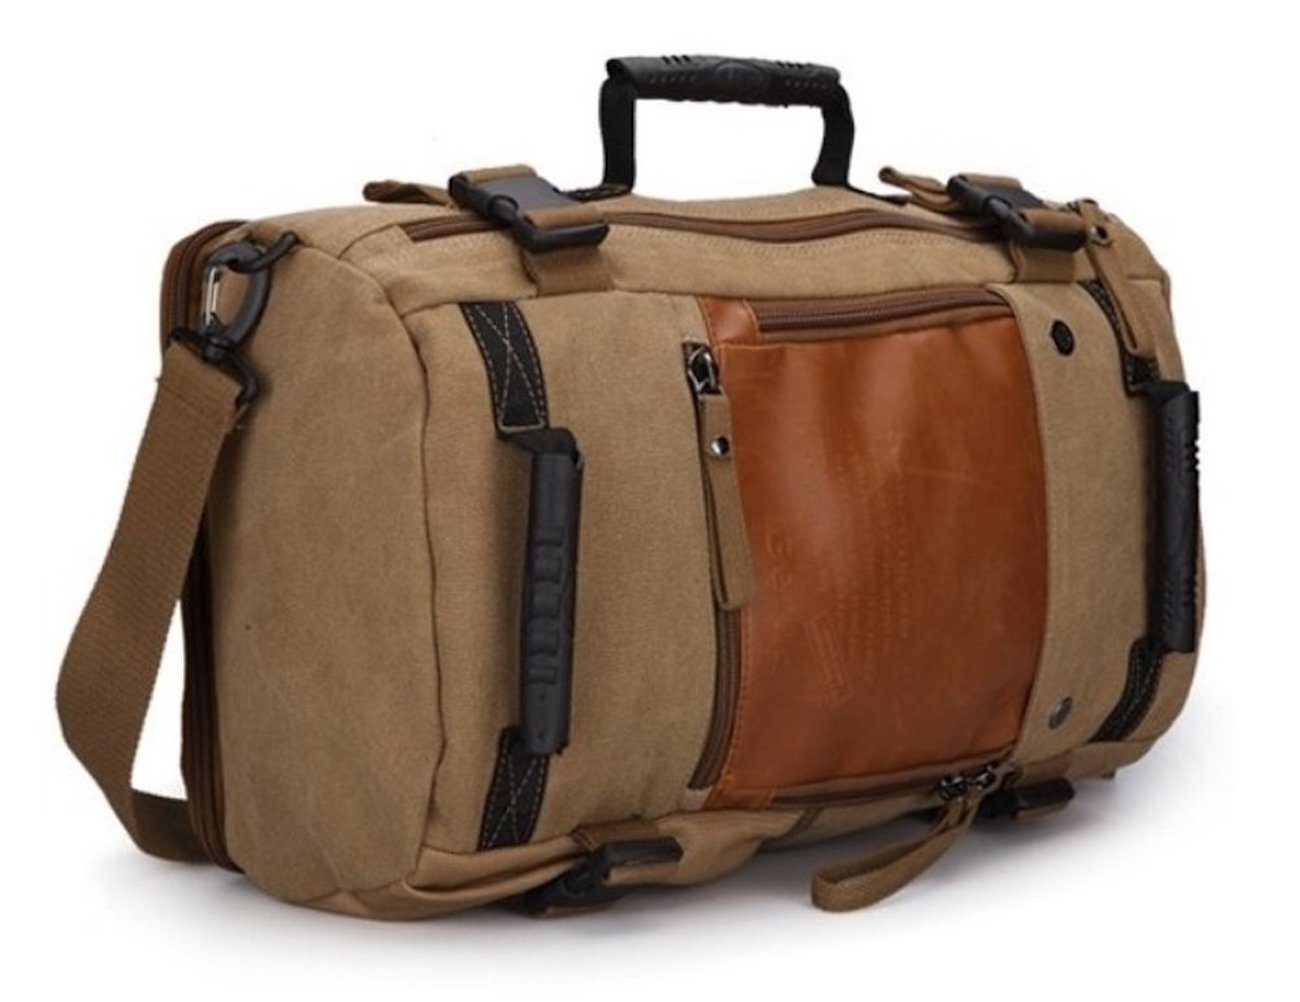 Ibagbar Canvas Travel Backpack » Gadget Flow